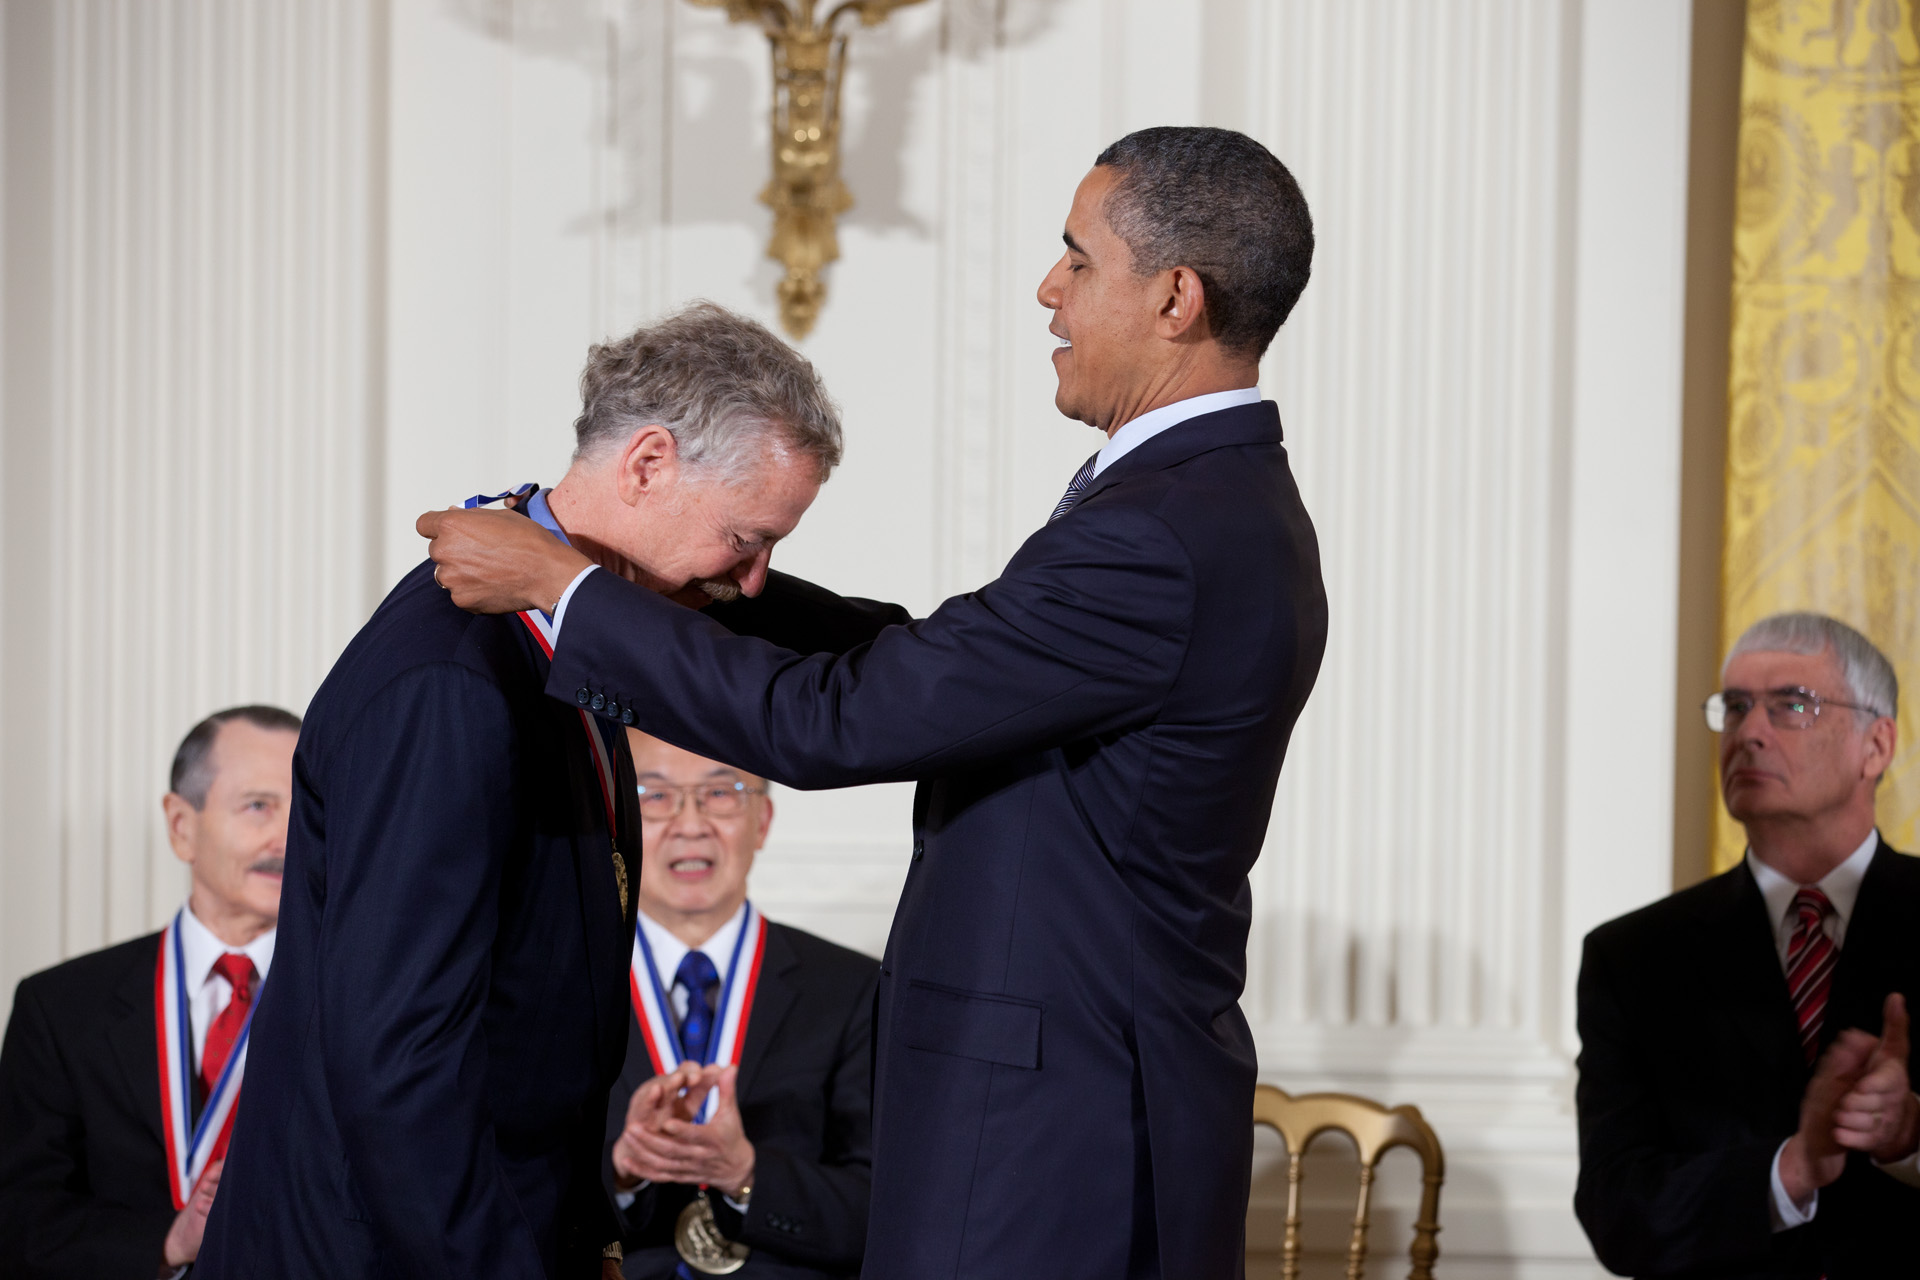 President Obama presents the 2010 National Medals of Science, Technology and Innovation